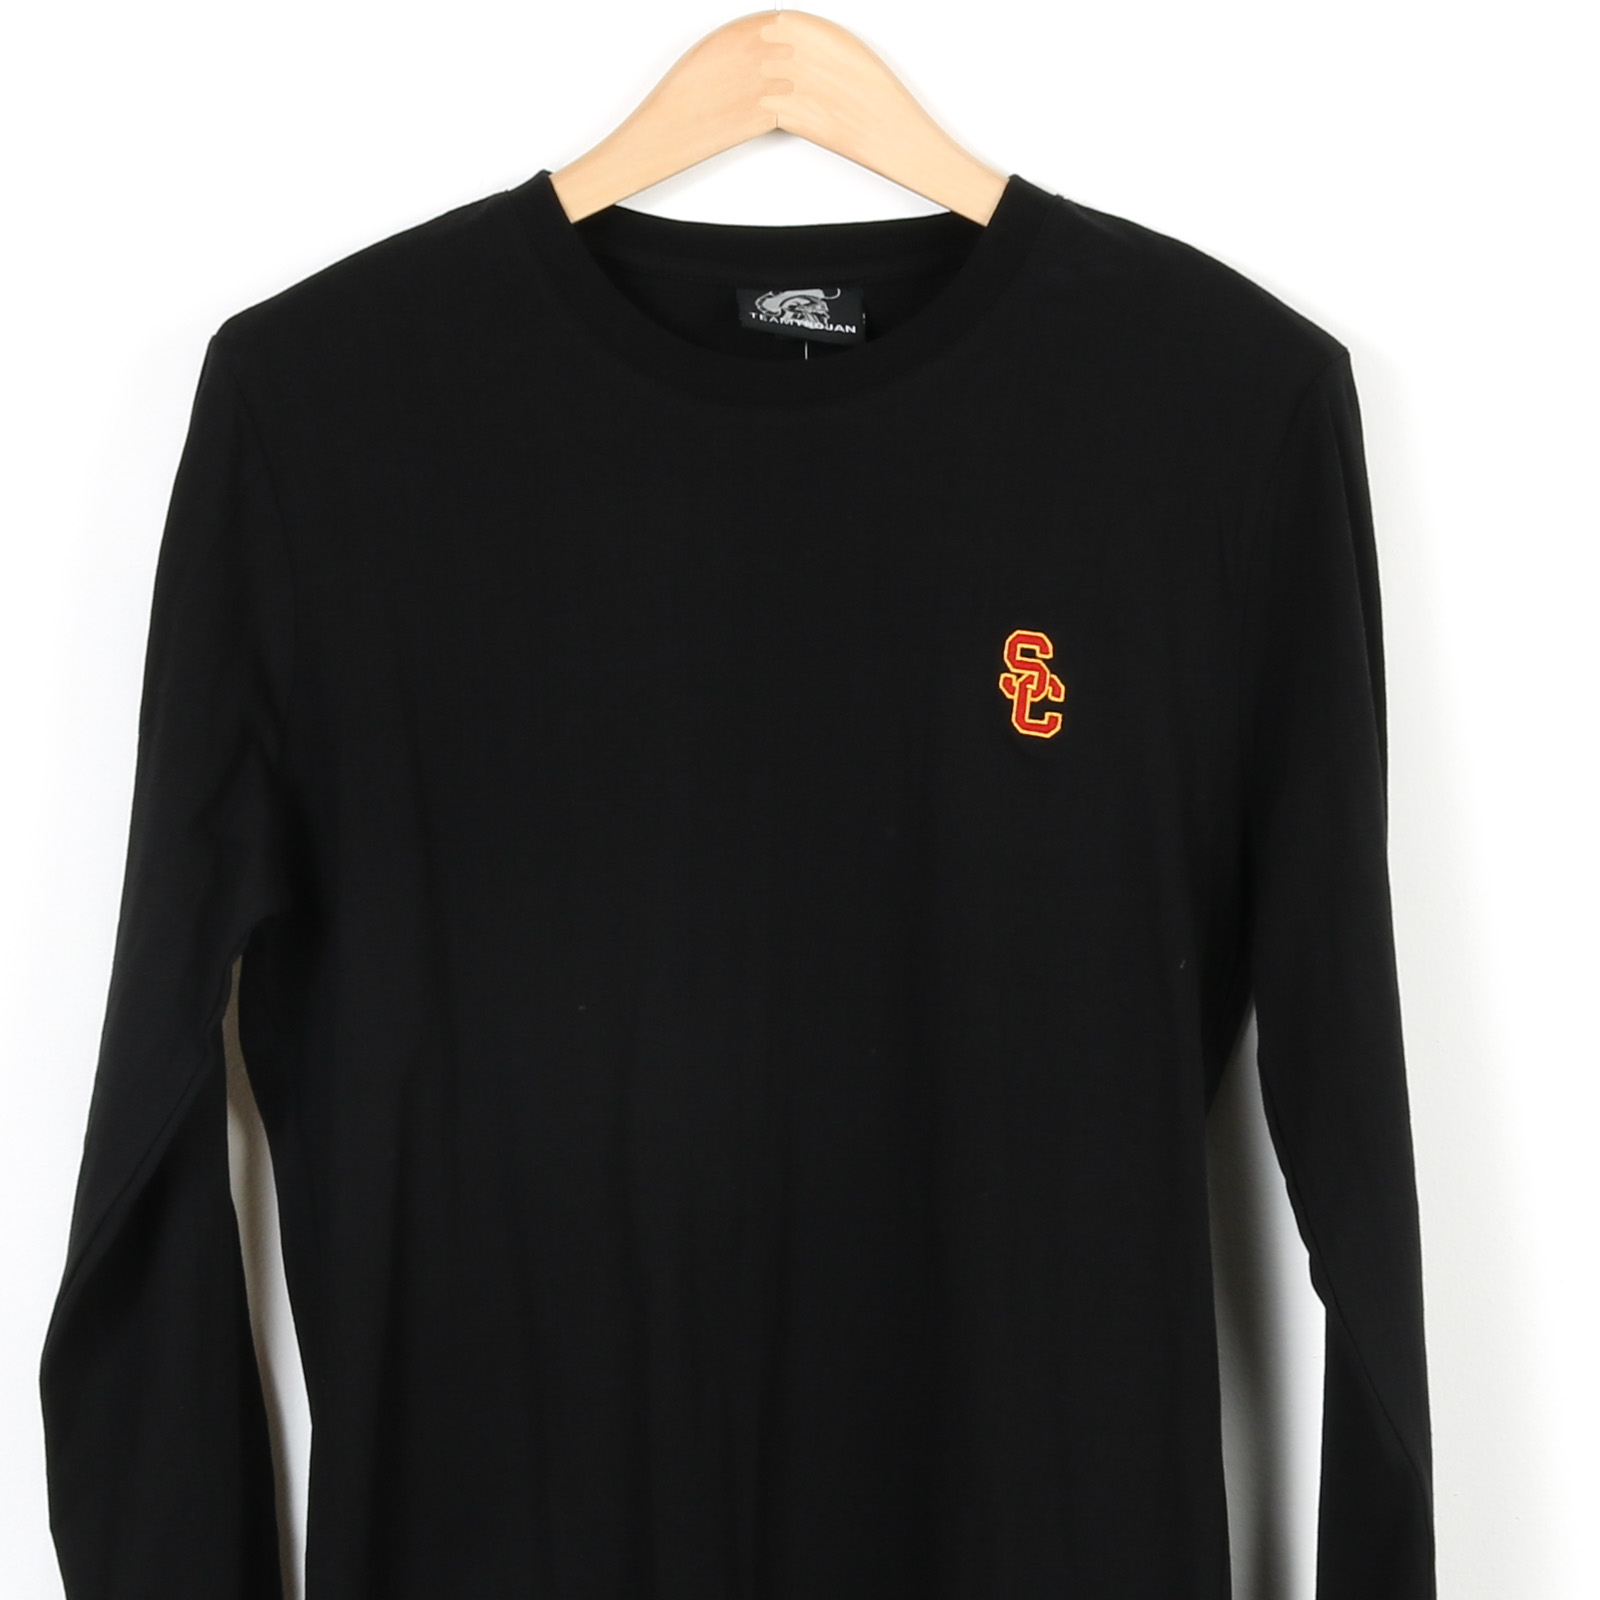 SC Int Embroidered Mens Core LS Tee image91